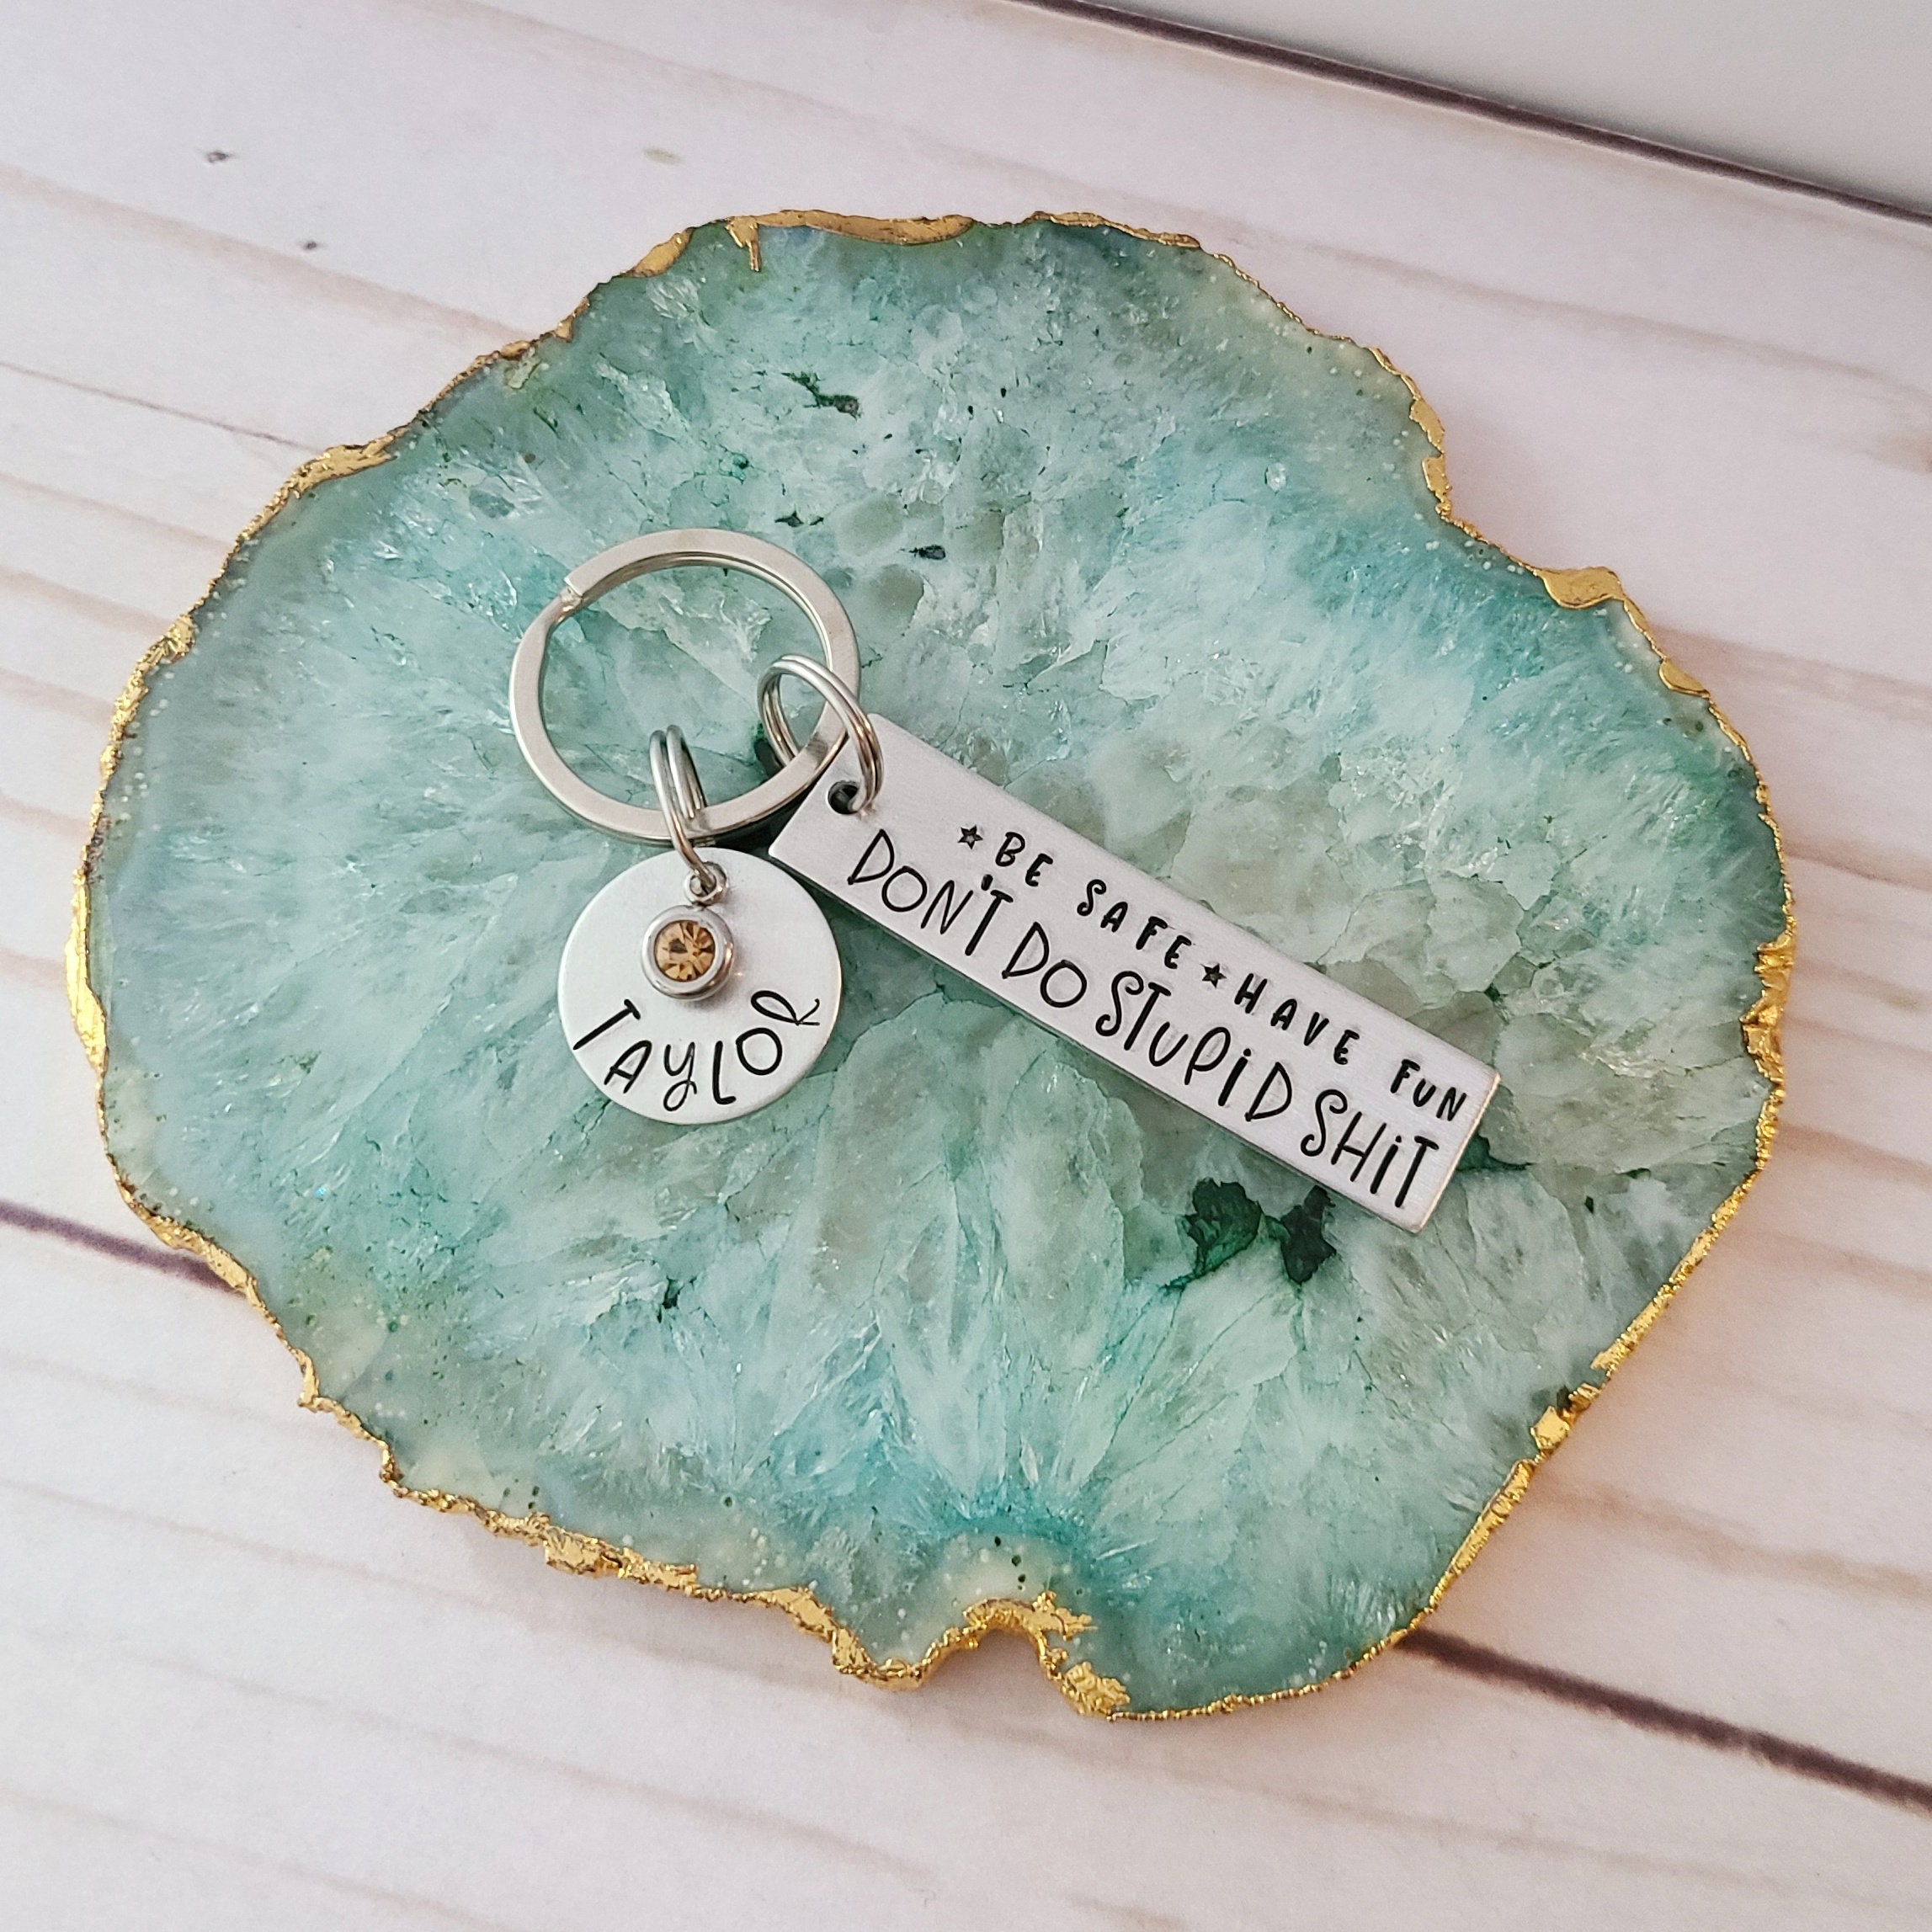 Be Safe Have Fun Don't Do Stupid Shit Keychain – Candidly K Handmade